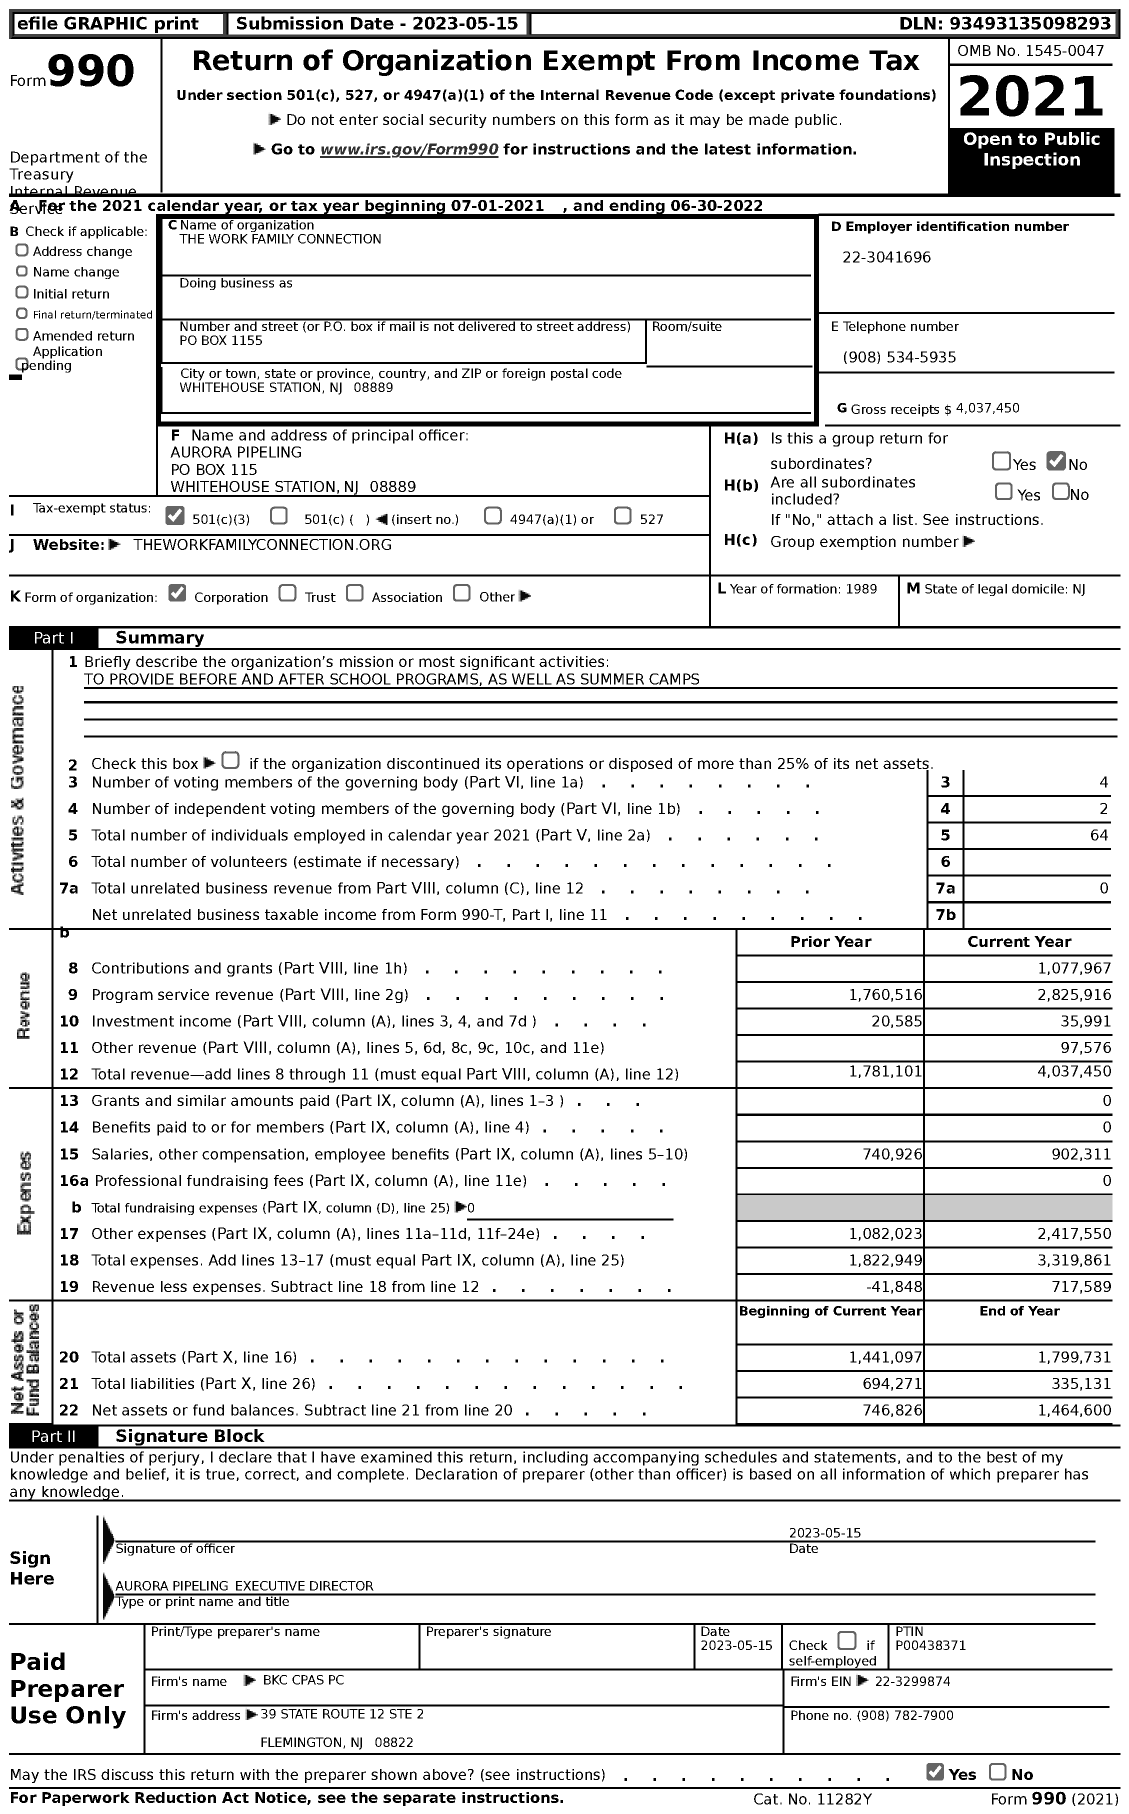 Image of first page of 2021 Form 990 for The Work Family Connection